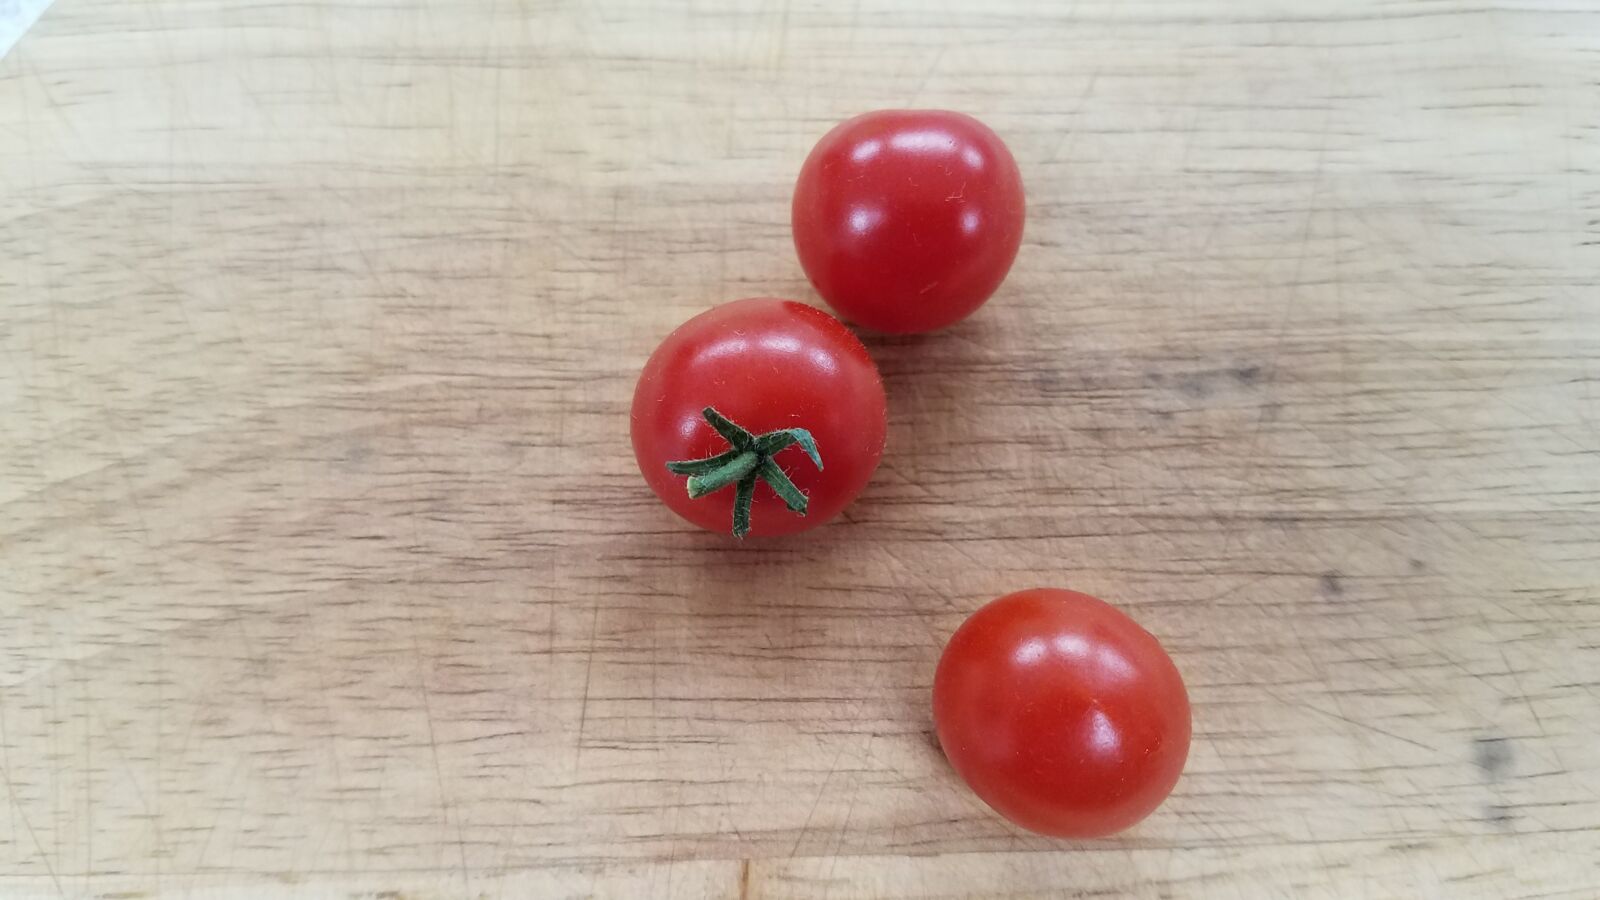 Samsung Galaxy S7 sample photo. Tomato, red, vegetables photography